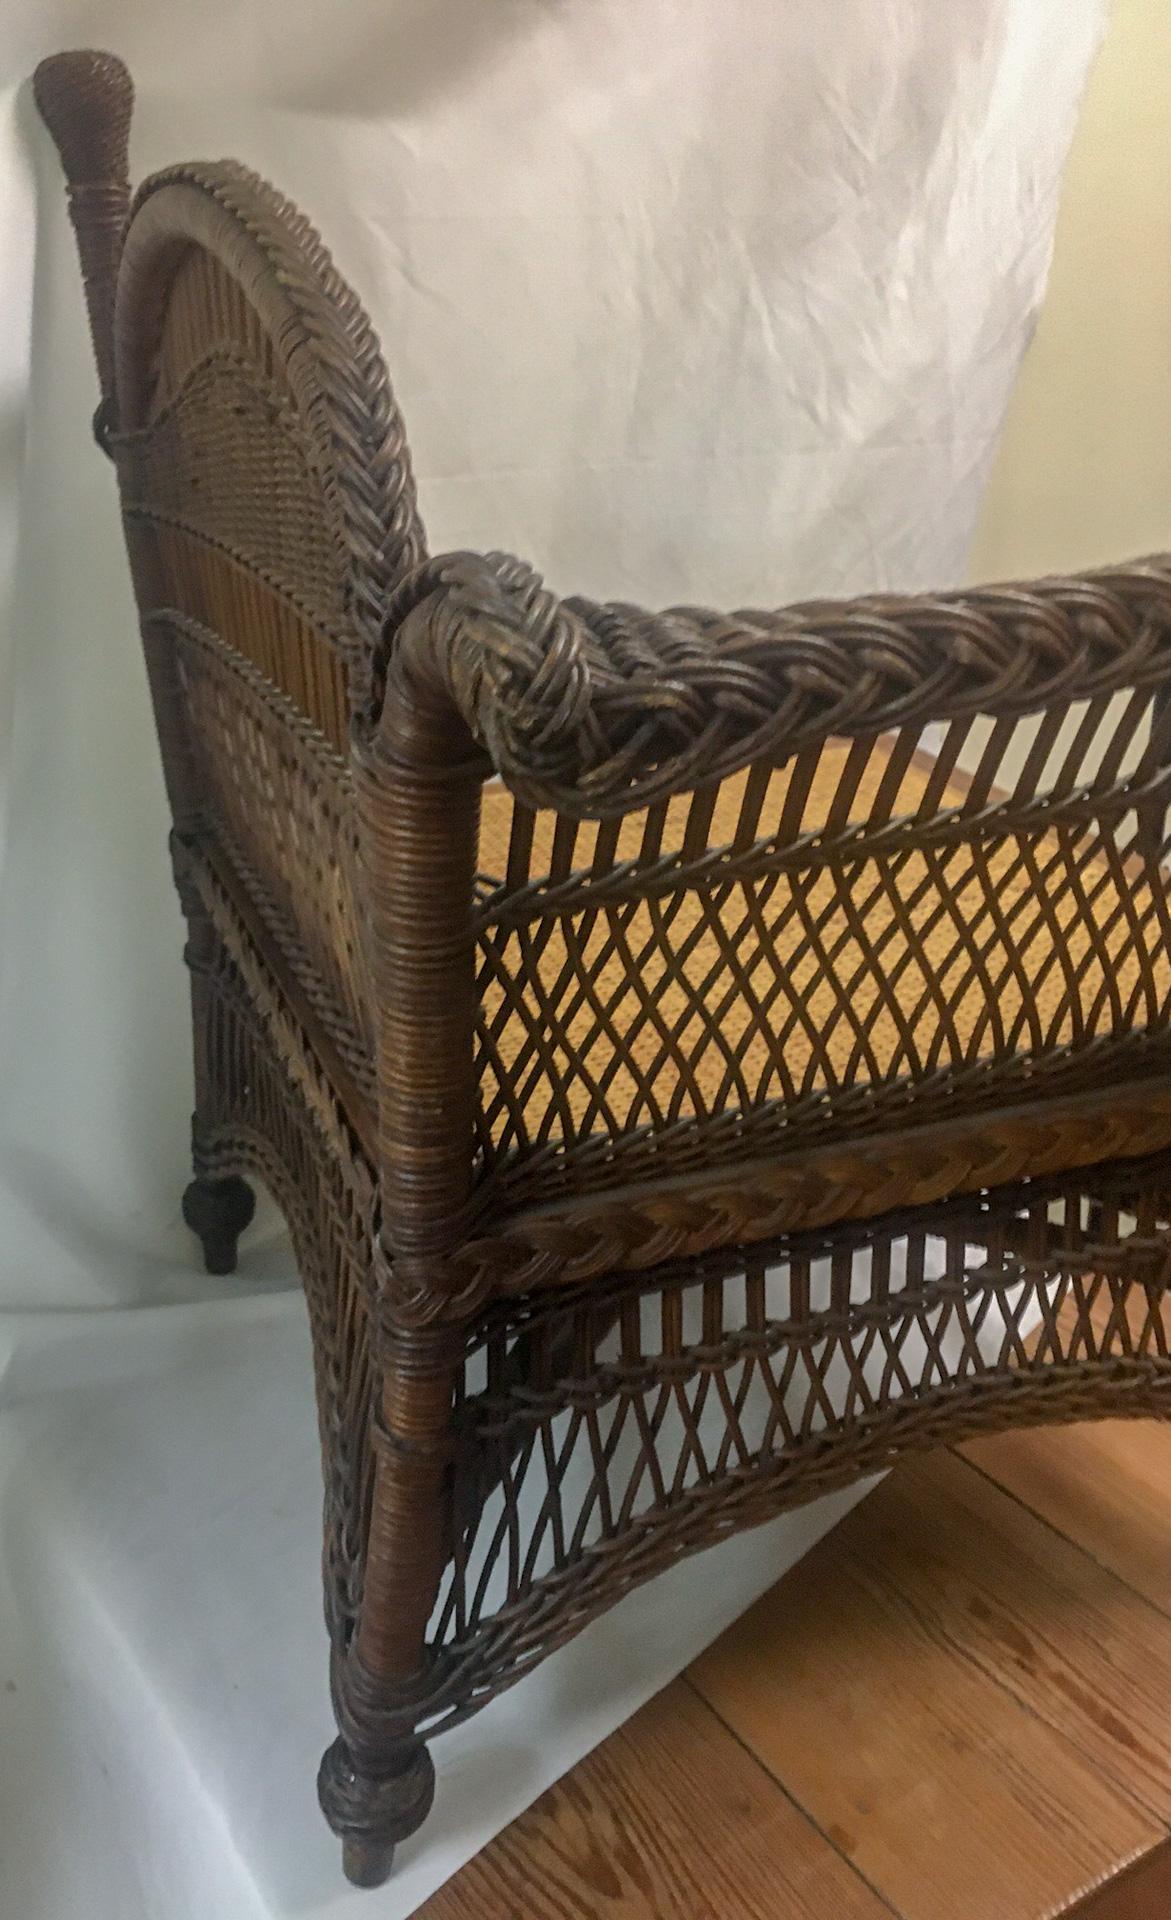 Heywood Wakefield Natural Wicker Divan or Photographer's Chair circa 1900 In Good Condition For Sale In Savannah, GA